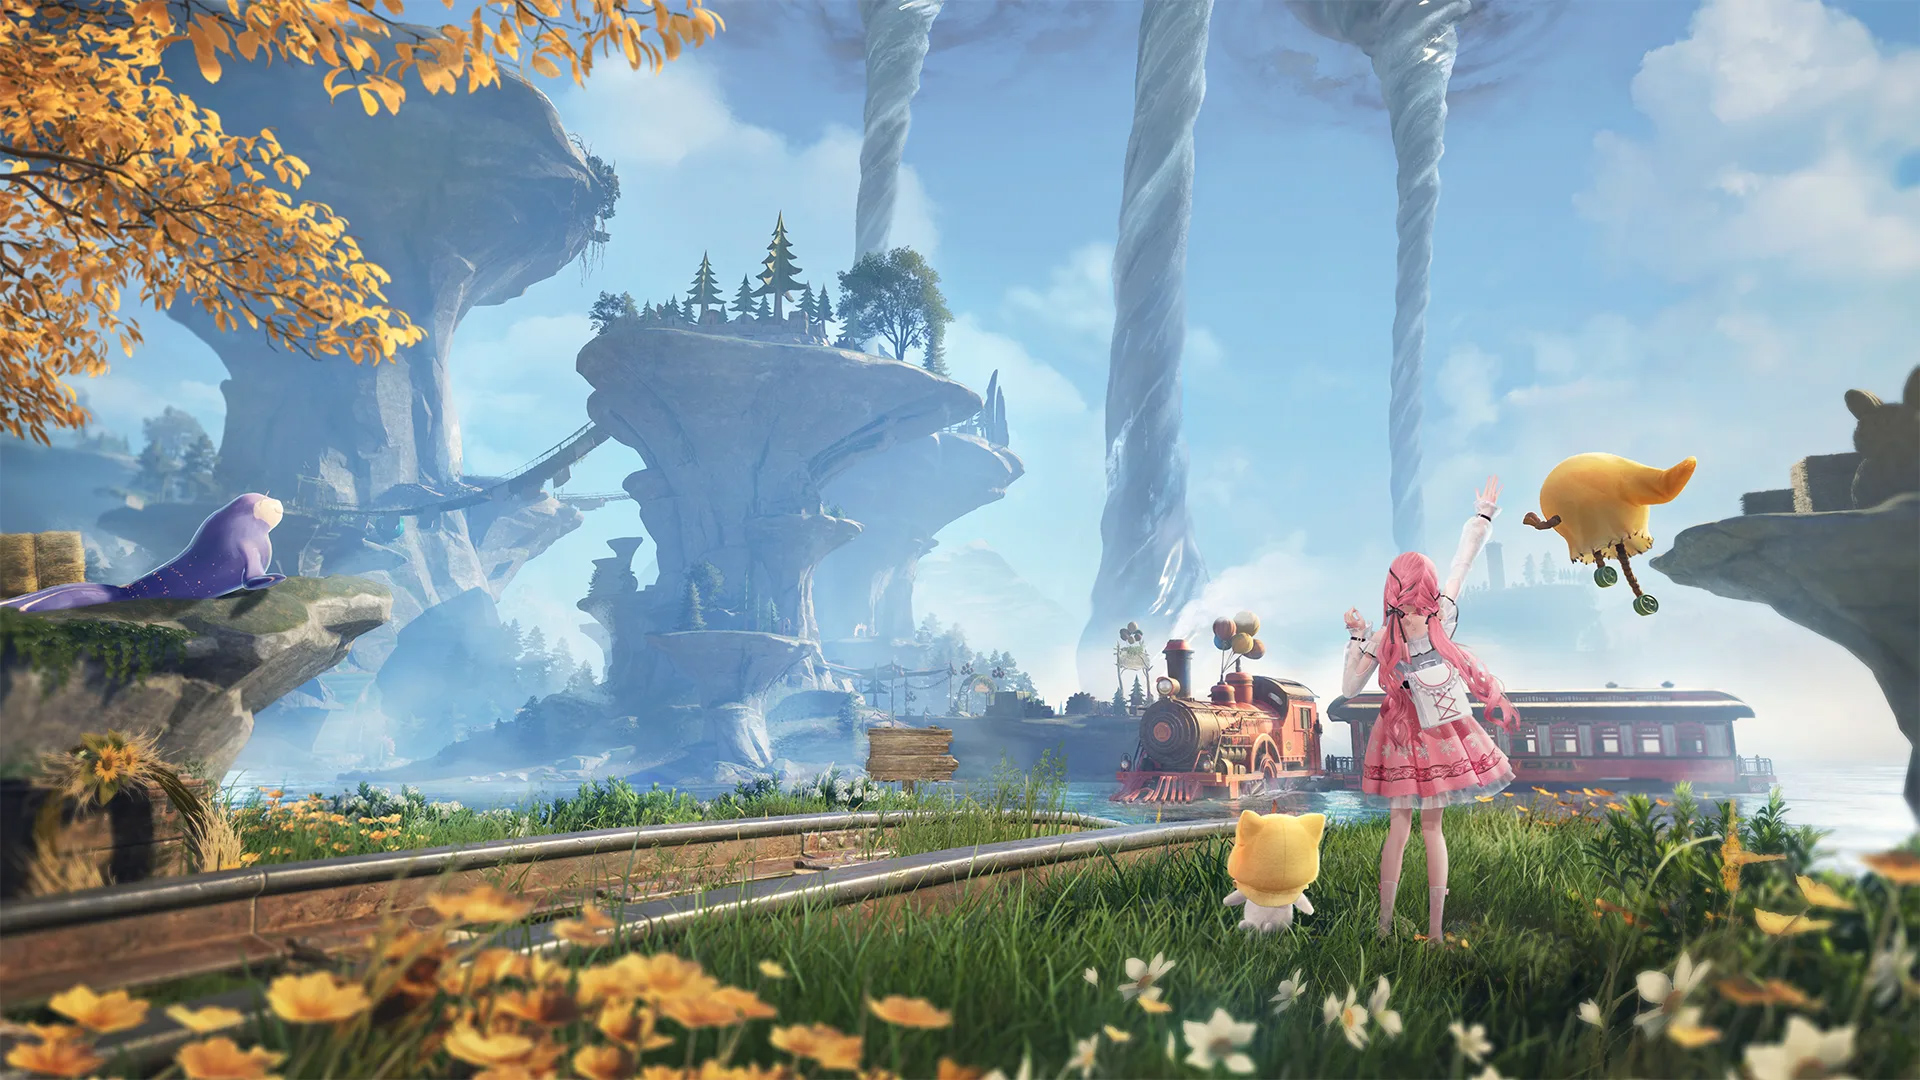 Infinity Nikki merges dress-up gameplay with the open-world genre